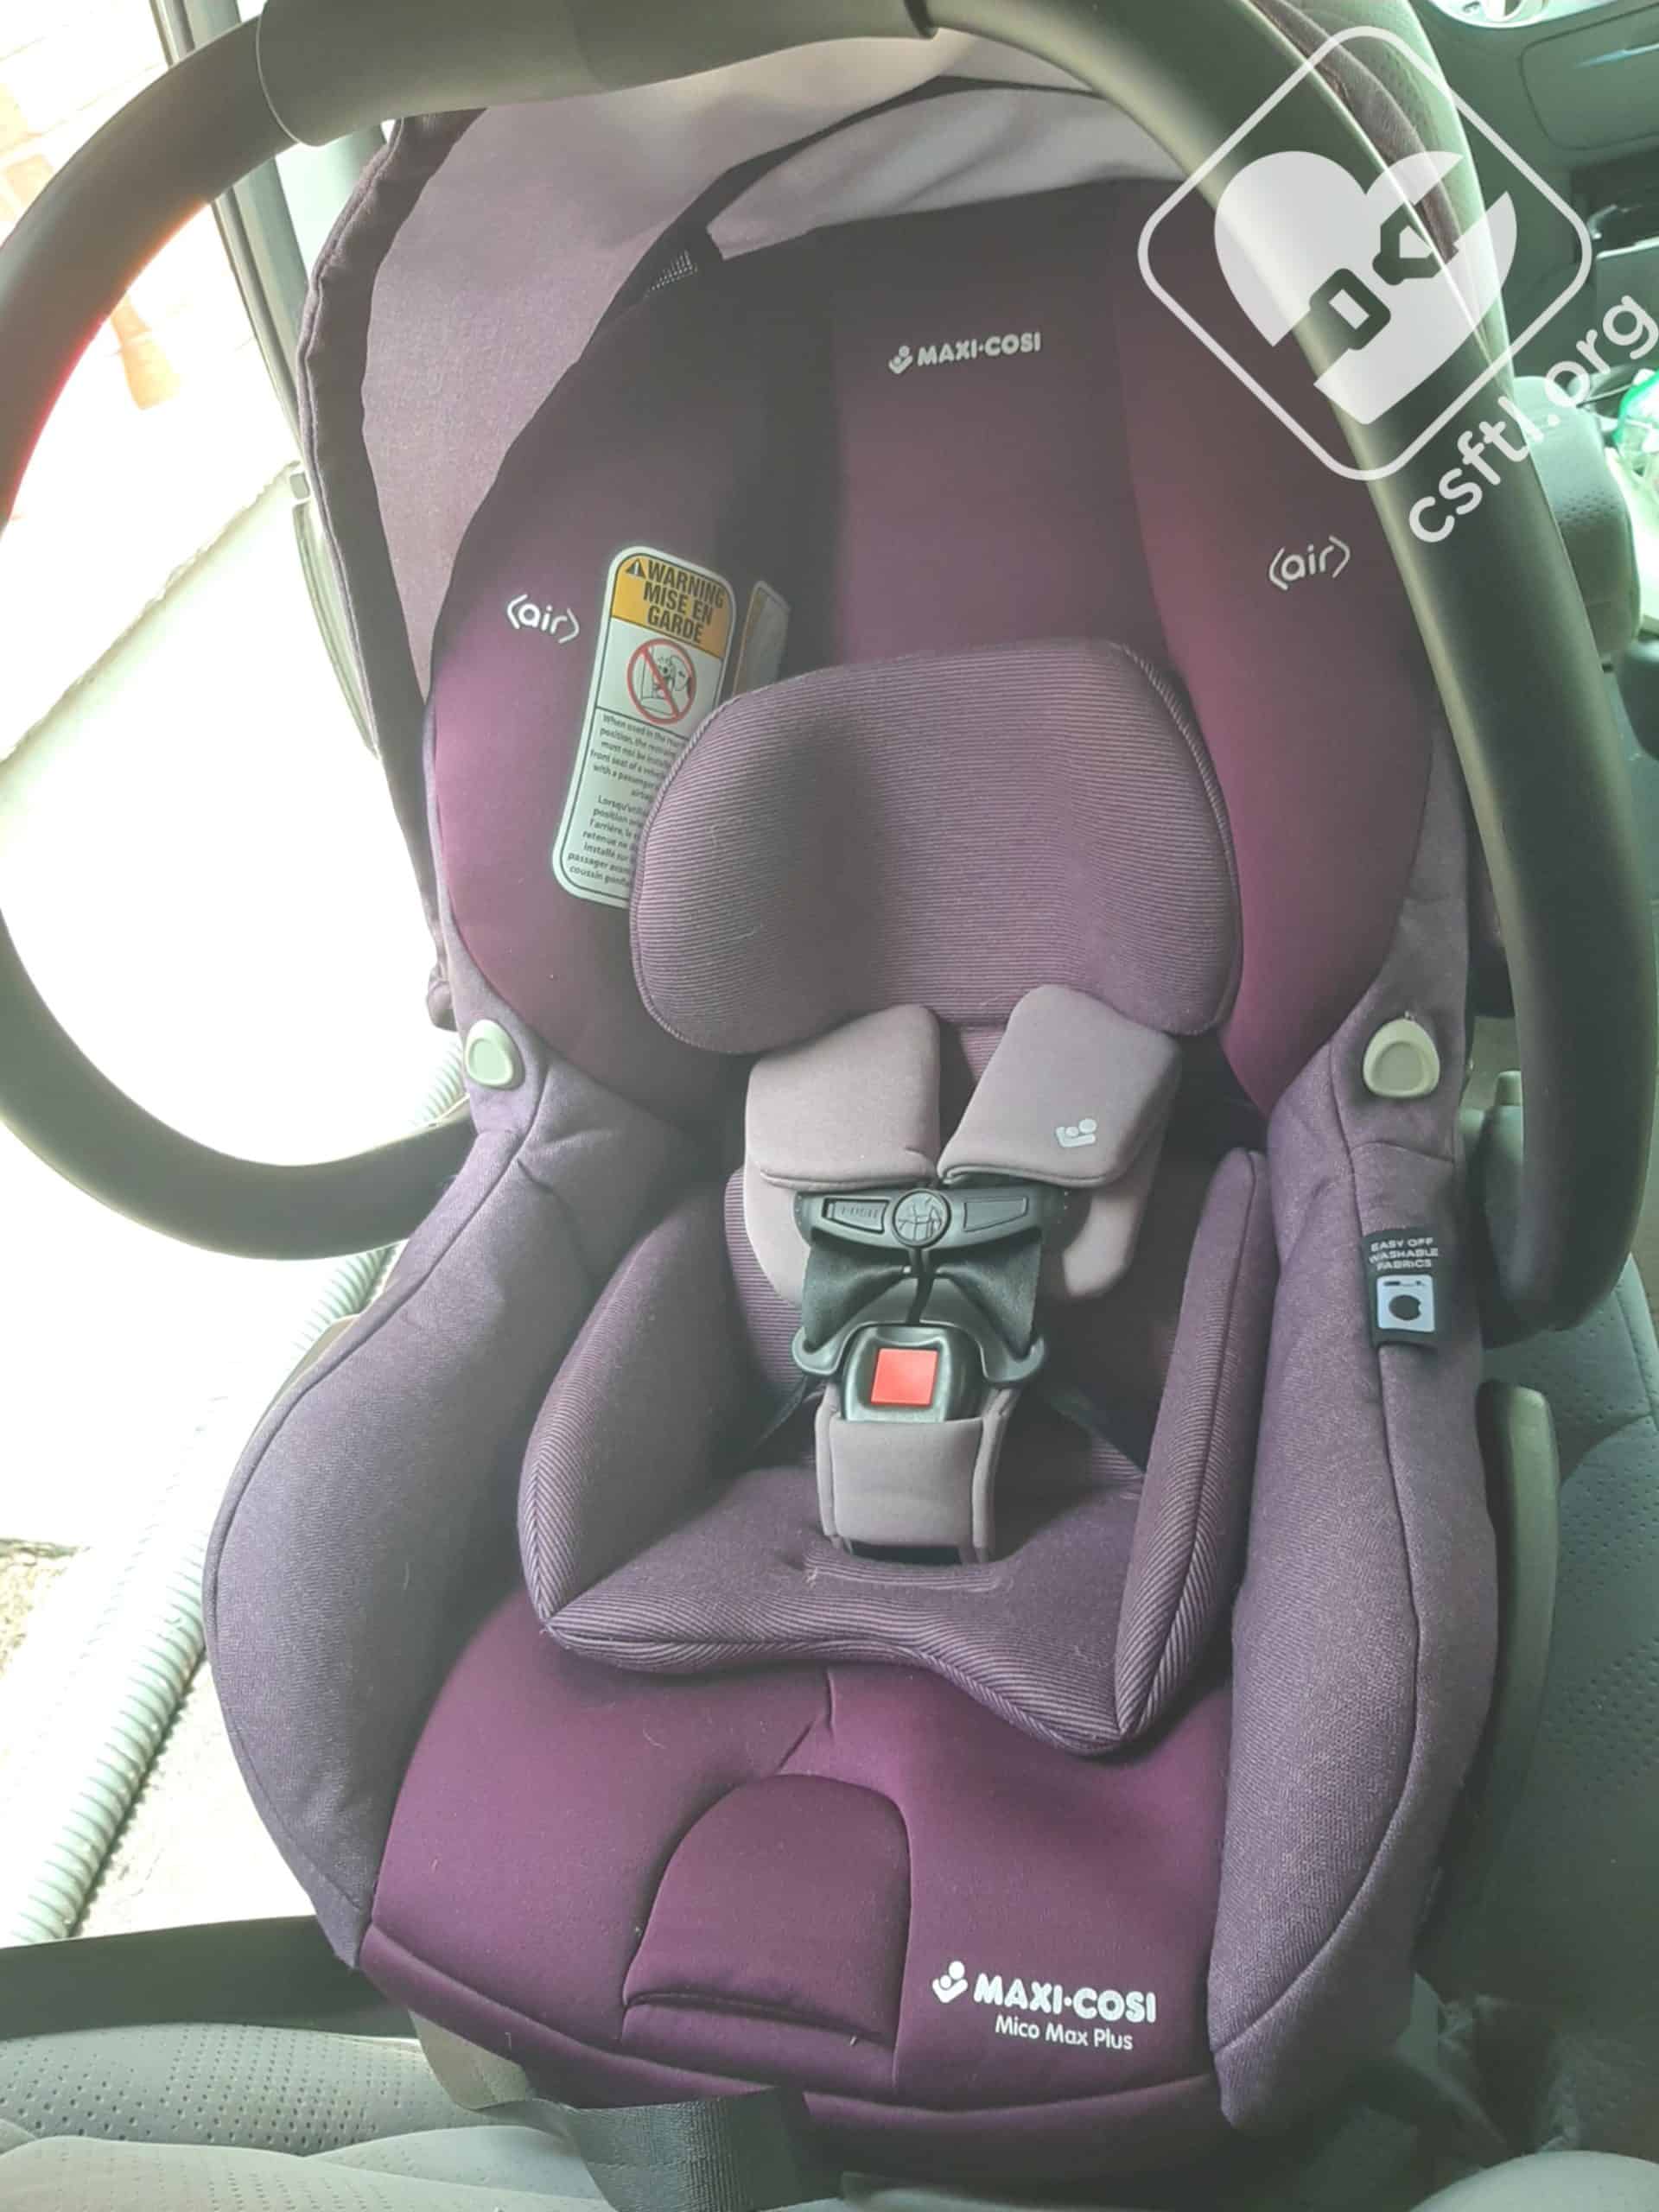 Maxi Cosi Mico Max Plus Review Car Seats For The Littles - Maxi Cosi Mico Car Seat Weight Limit